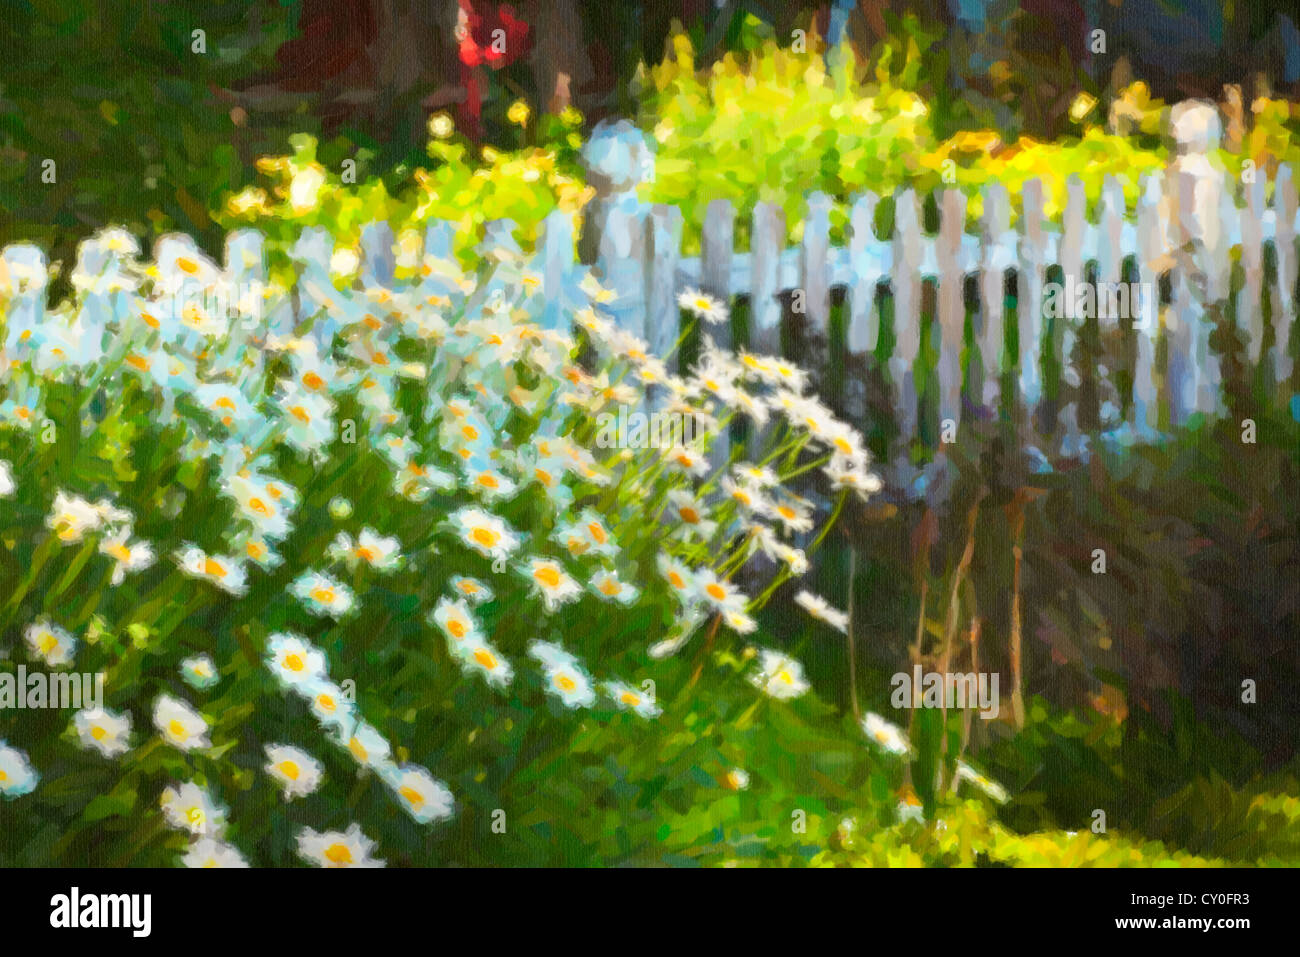 Shasta daisies in front of a white picket fence in the summertime garden. Stock Photo